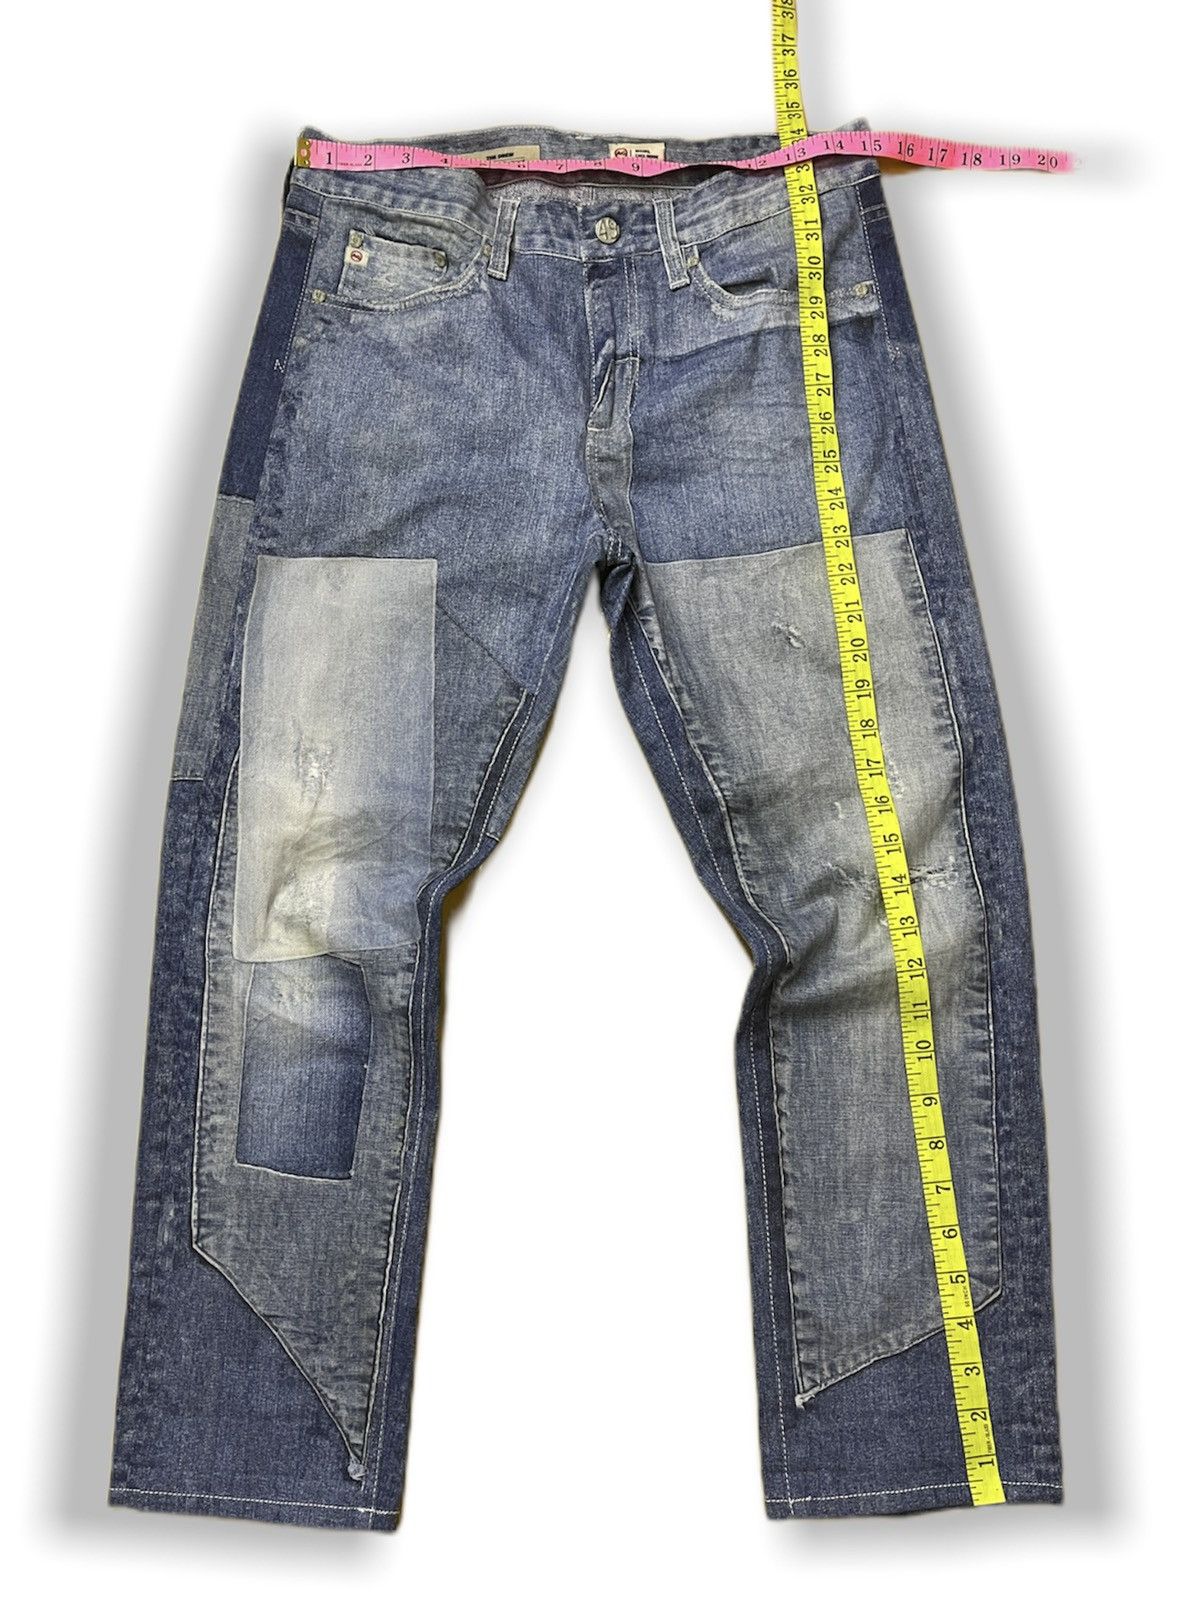 DISTRESSED PRINTED AG ADRIANO GOLDSCHMIED DENIM PANTS - 3